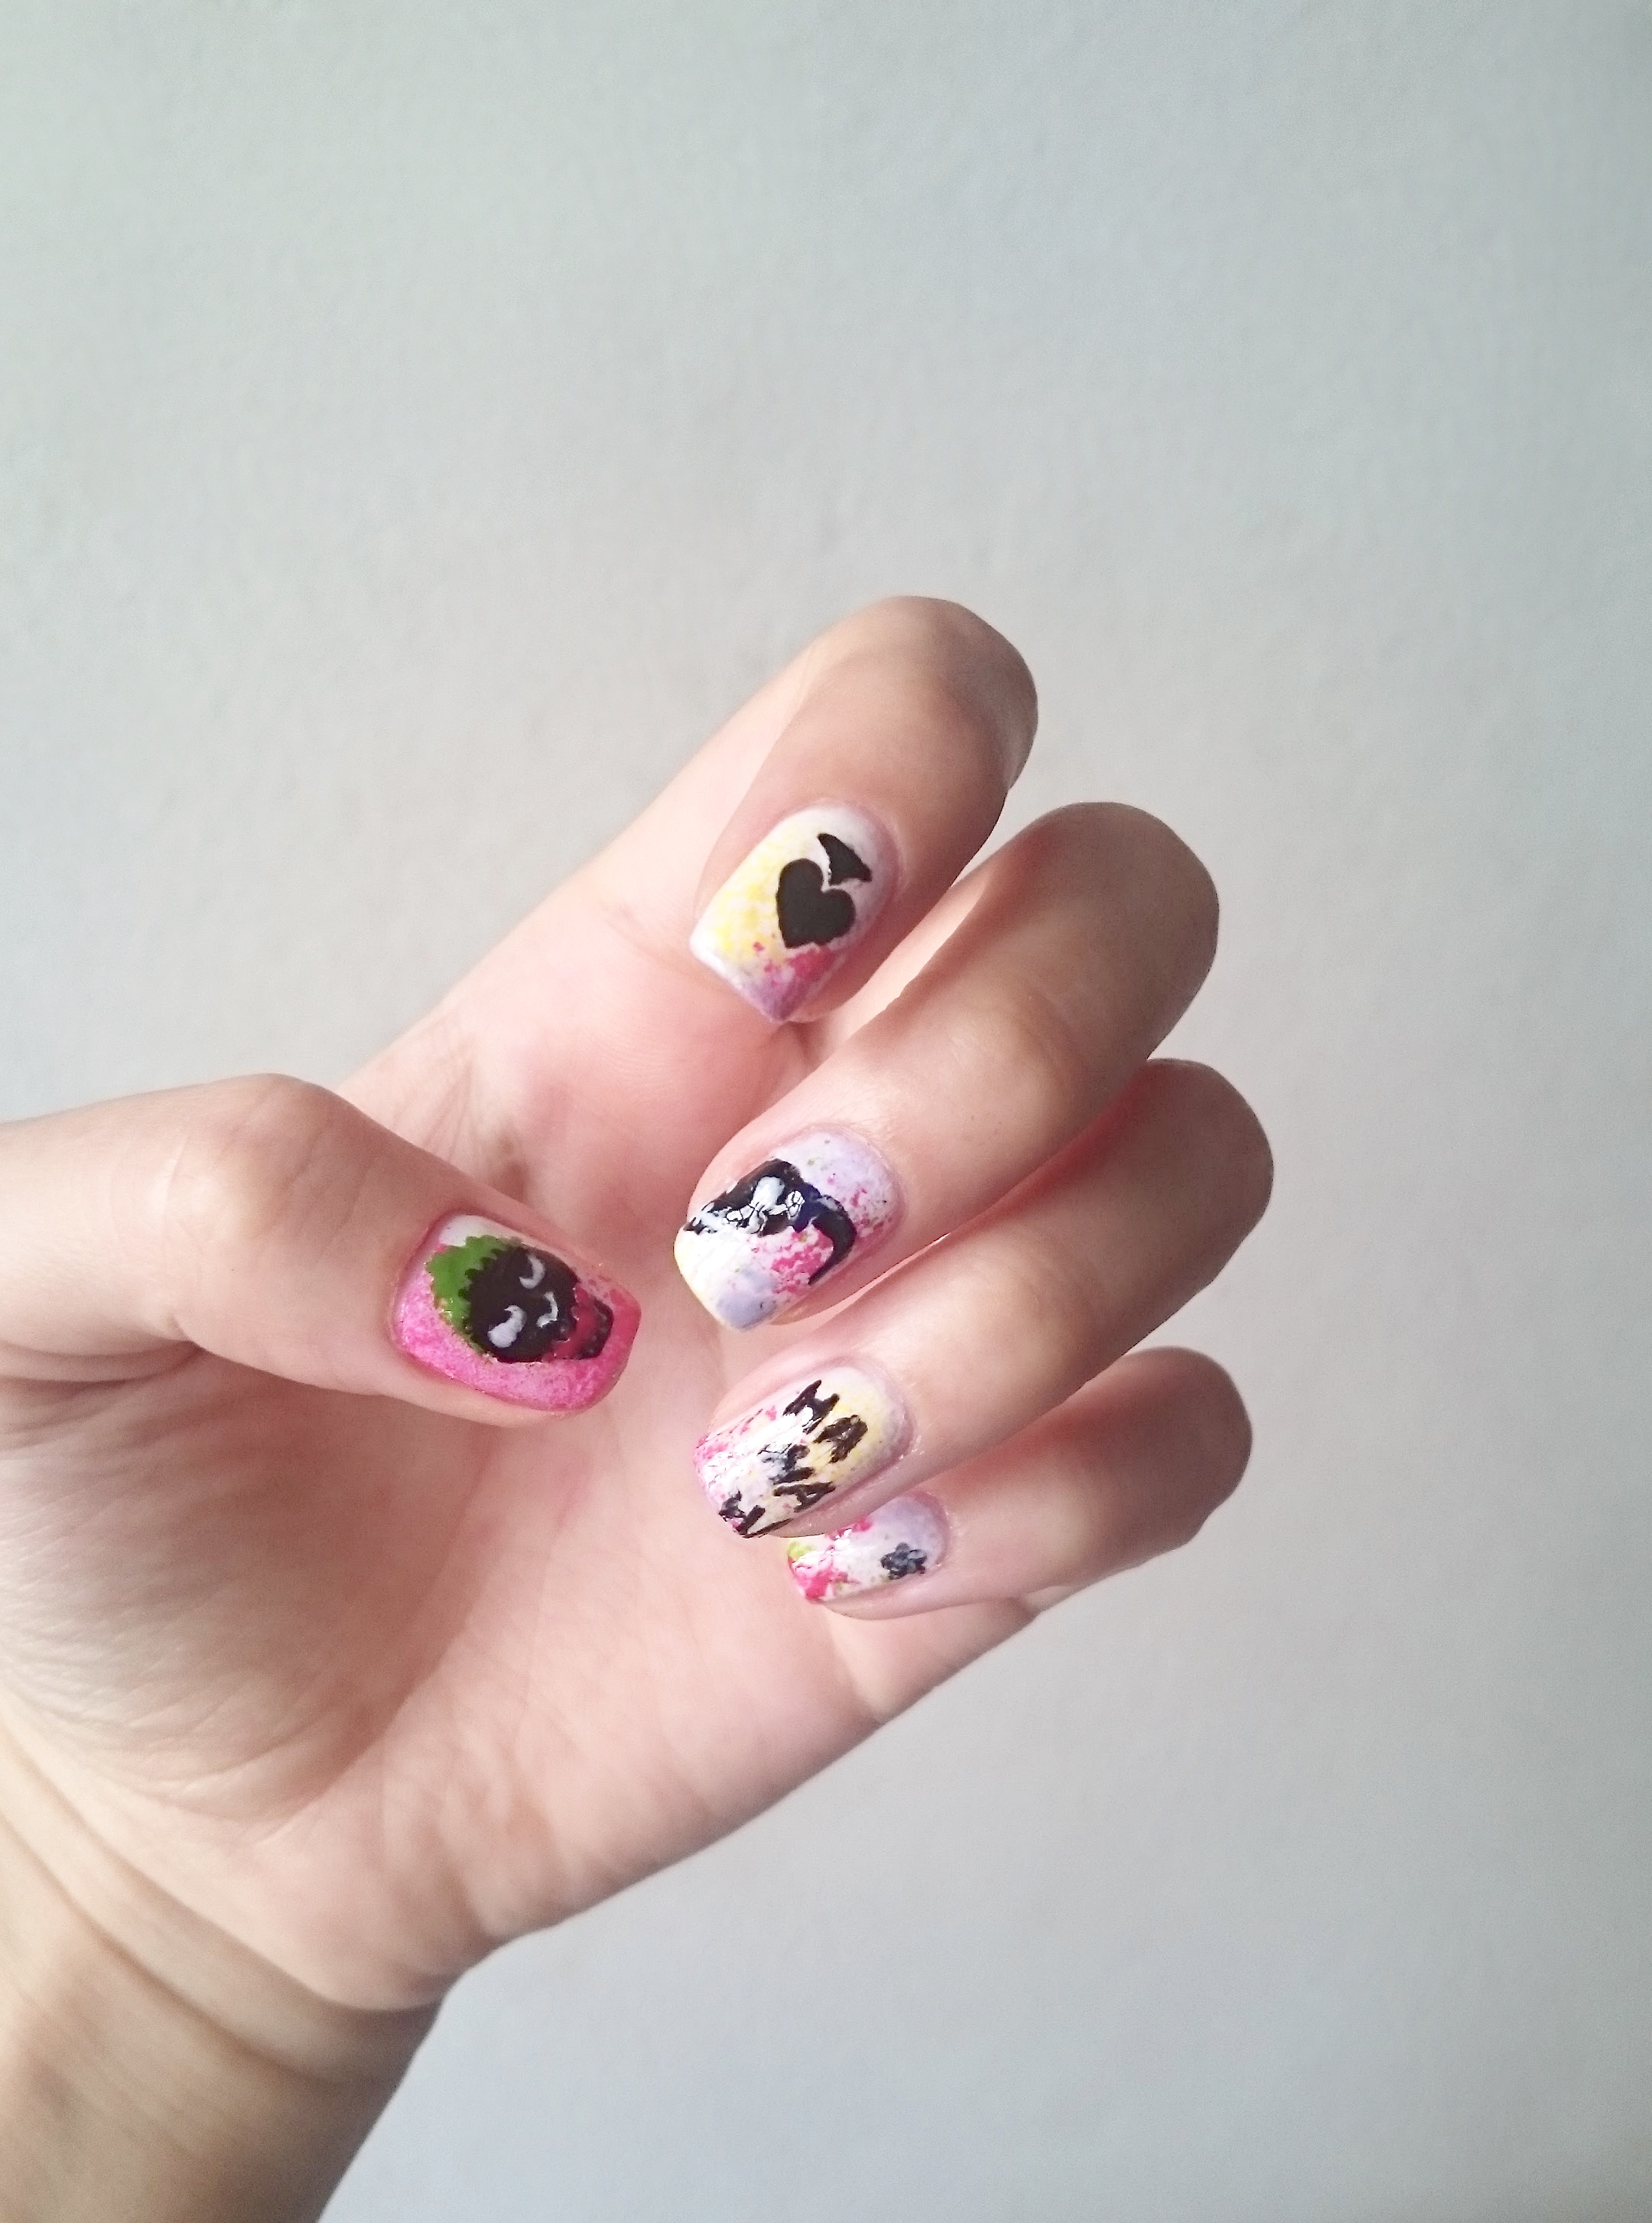 Nail Art Tutorial: Pirate Nails | Swatch And Learn